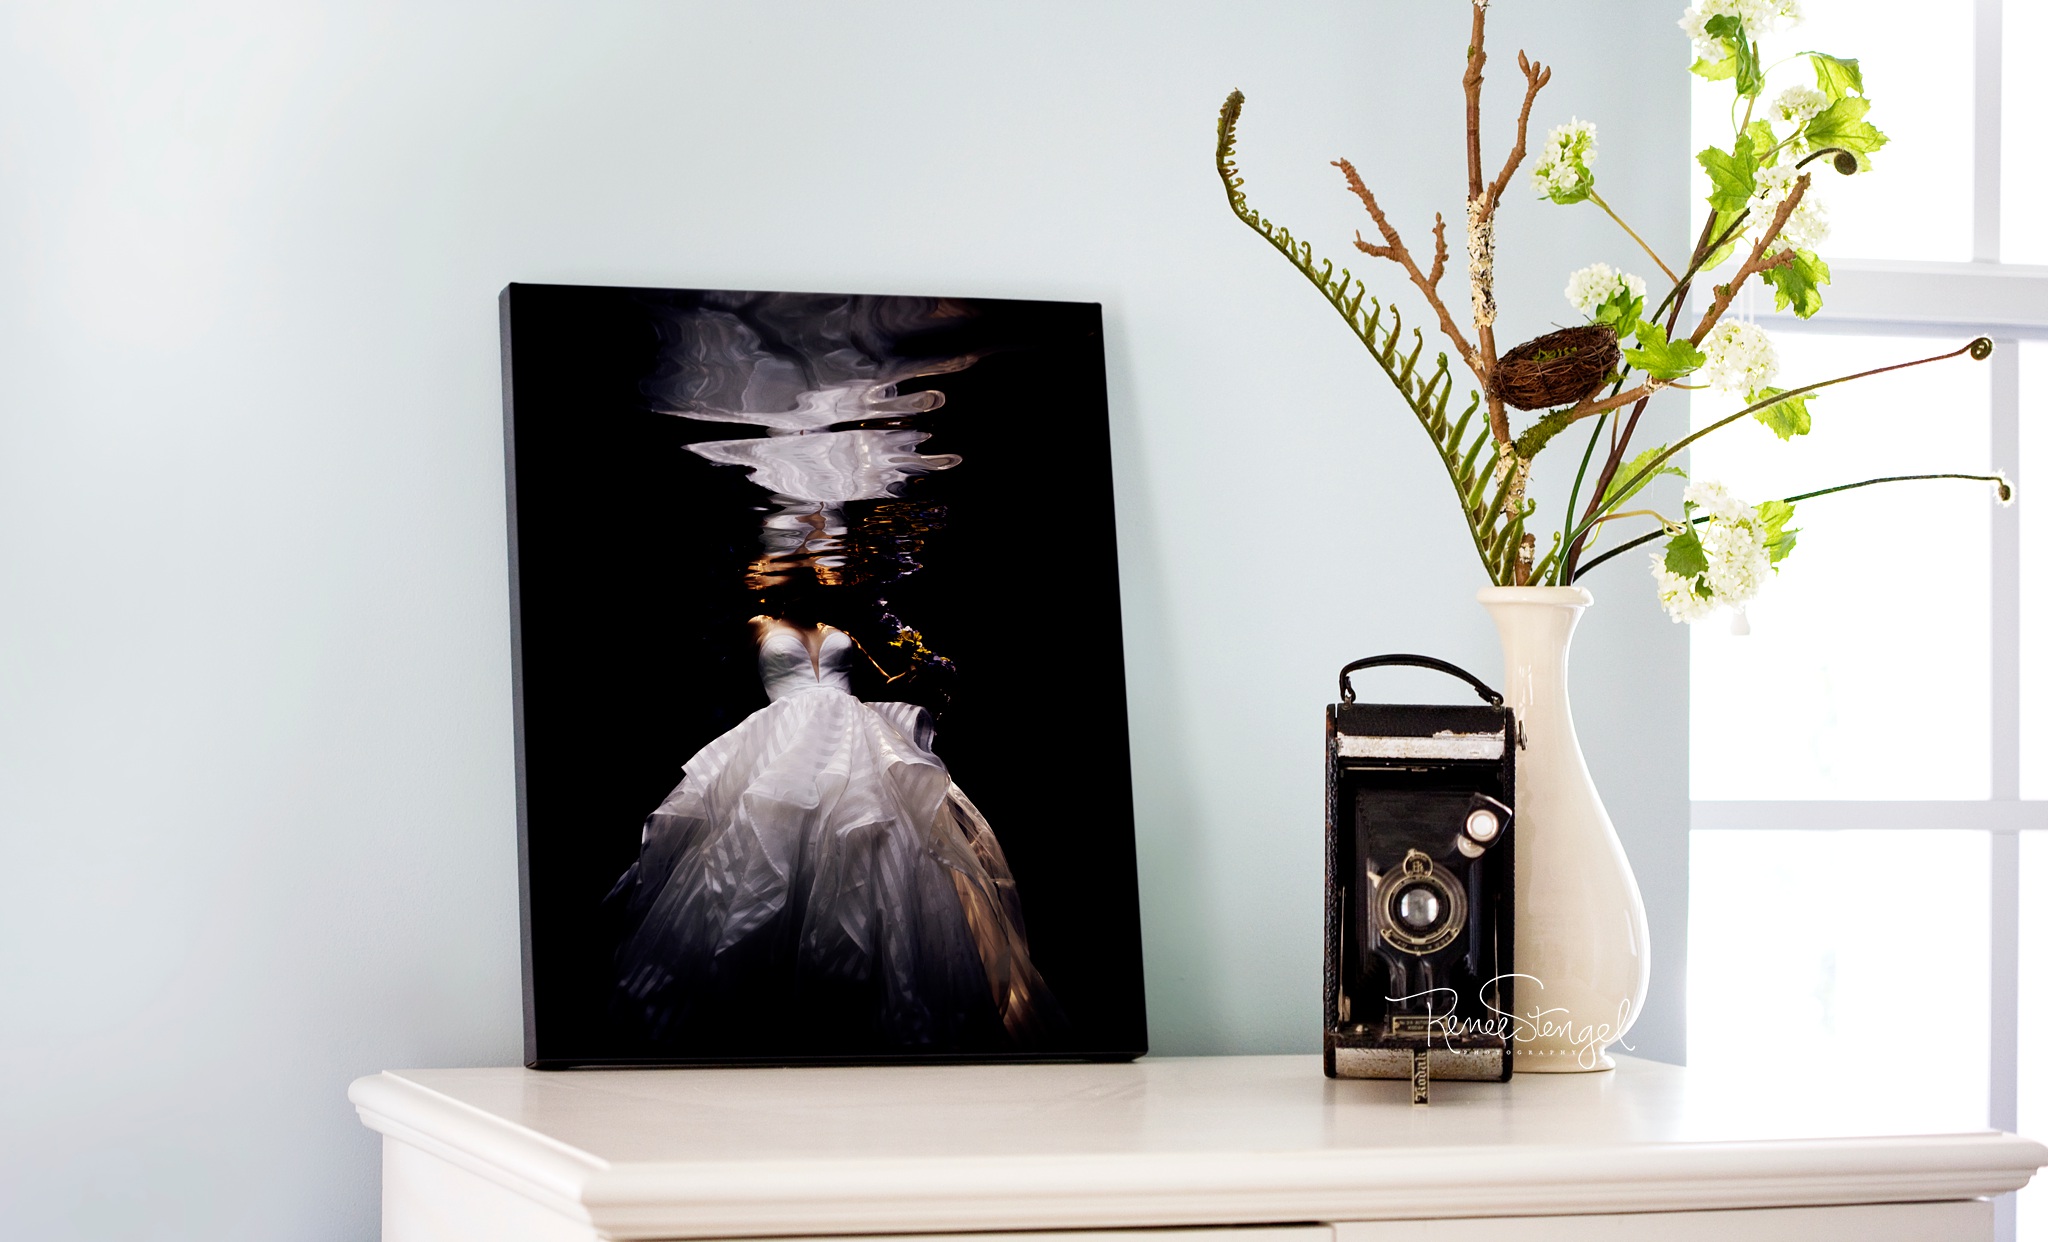 Underwater Art for your Home can be displayed in many beautiful ways.